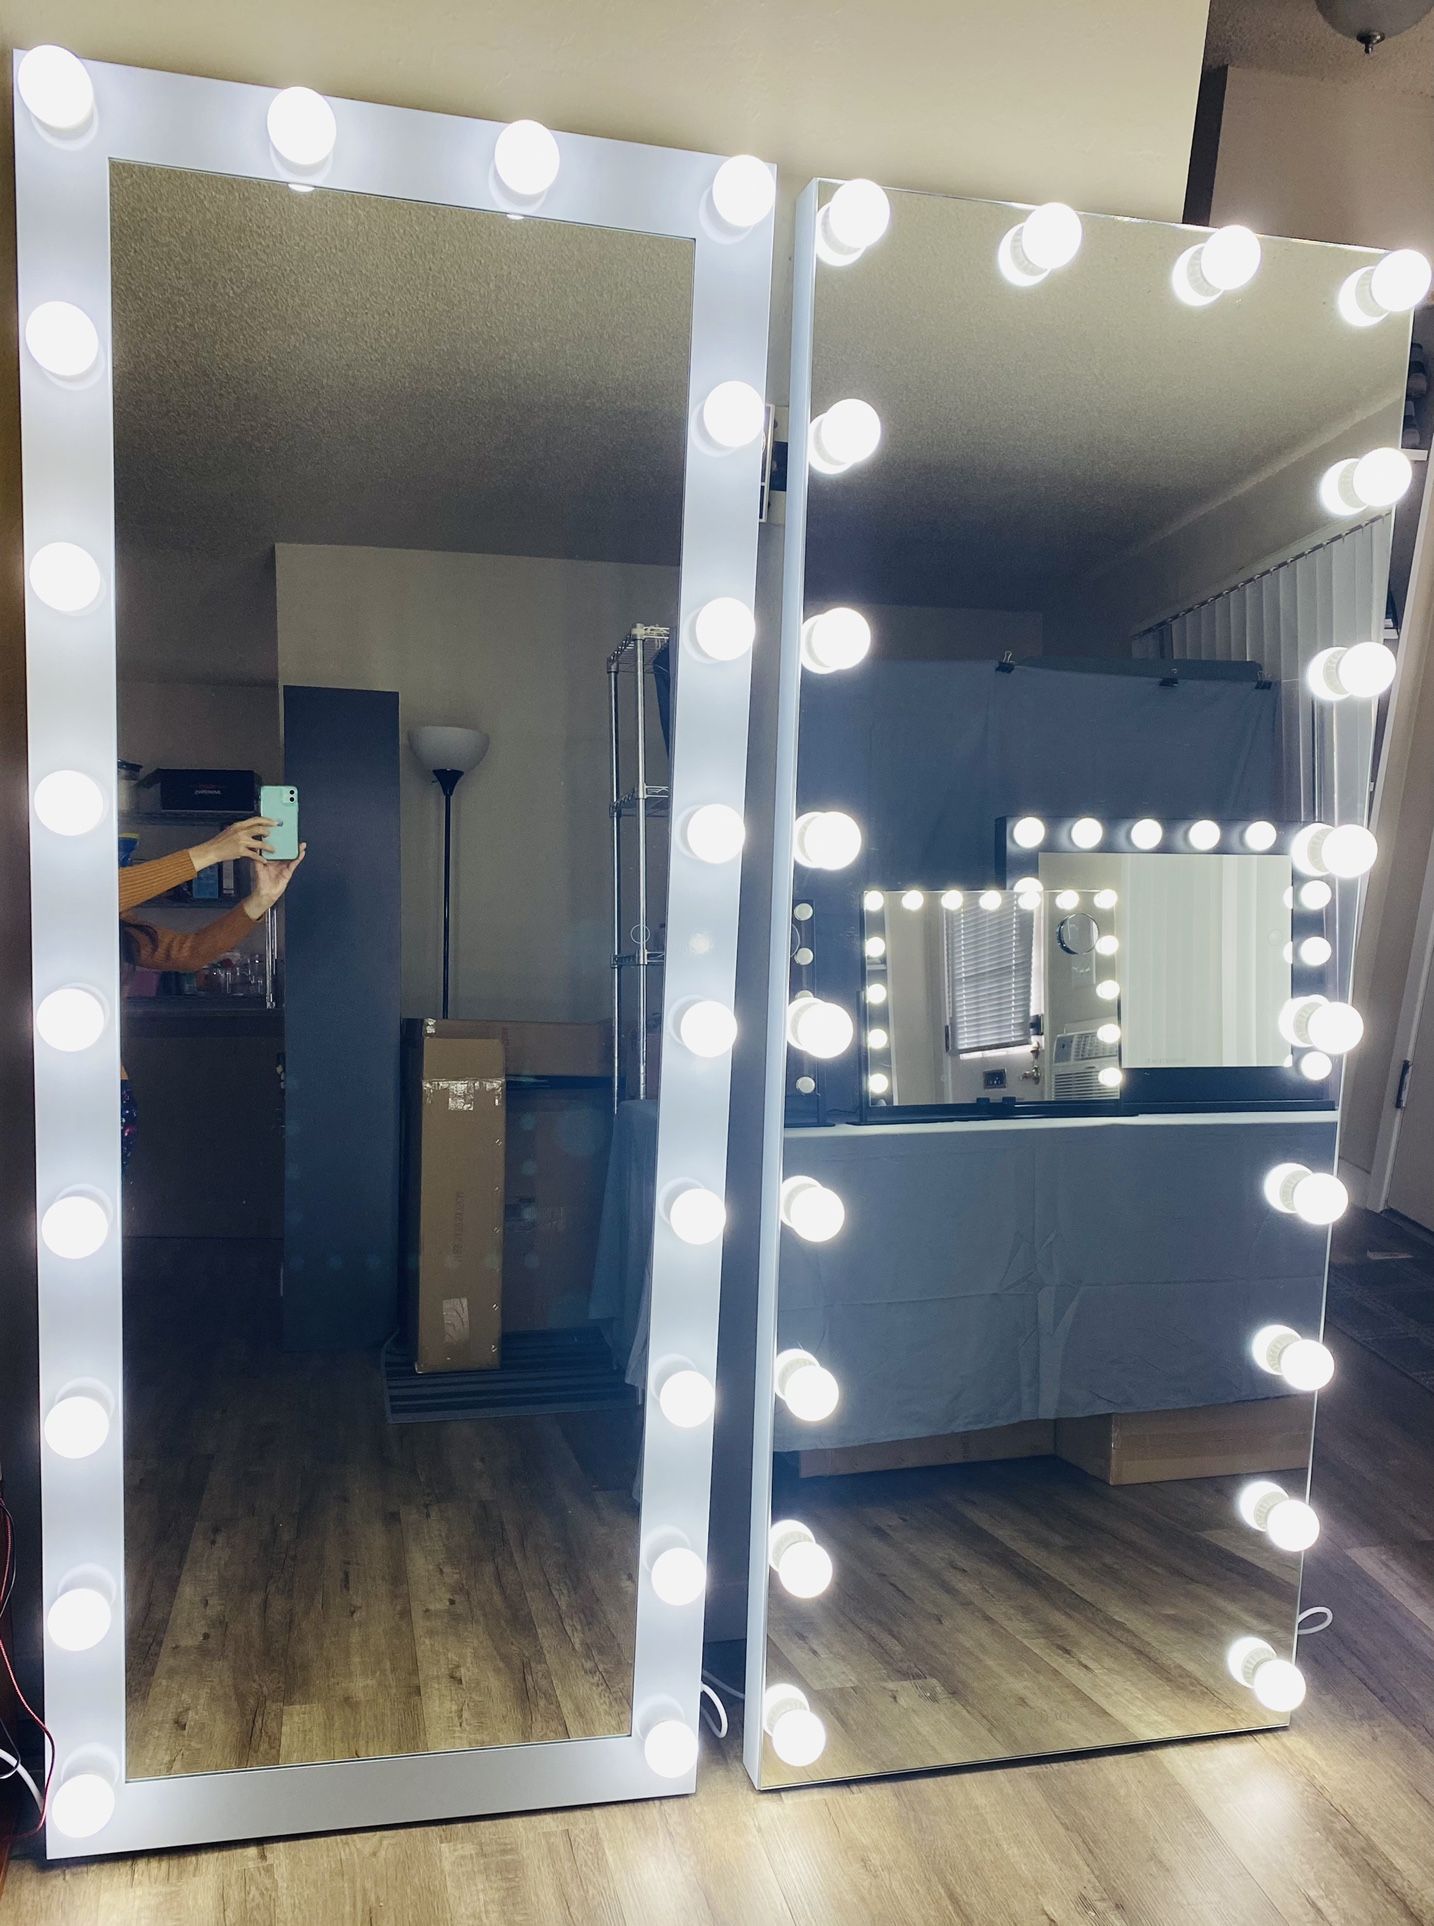 Brand new full Length floor vanity mirror With Touchscreen Control And Replaceable Led Light Bulbs 